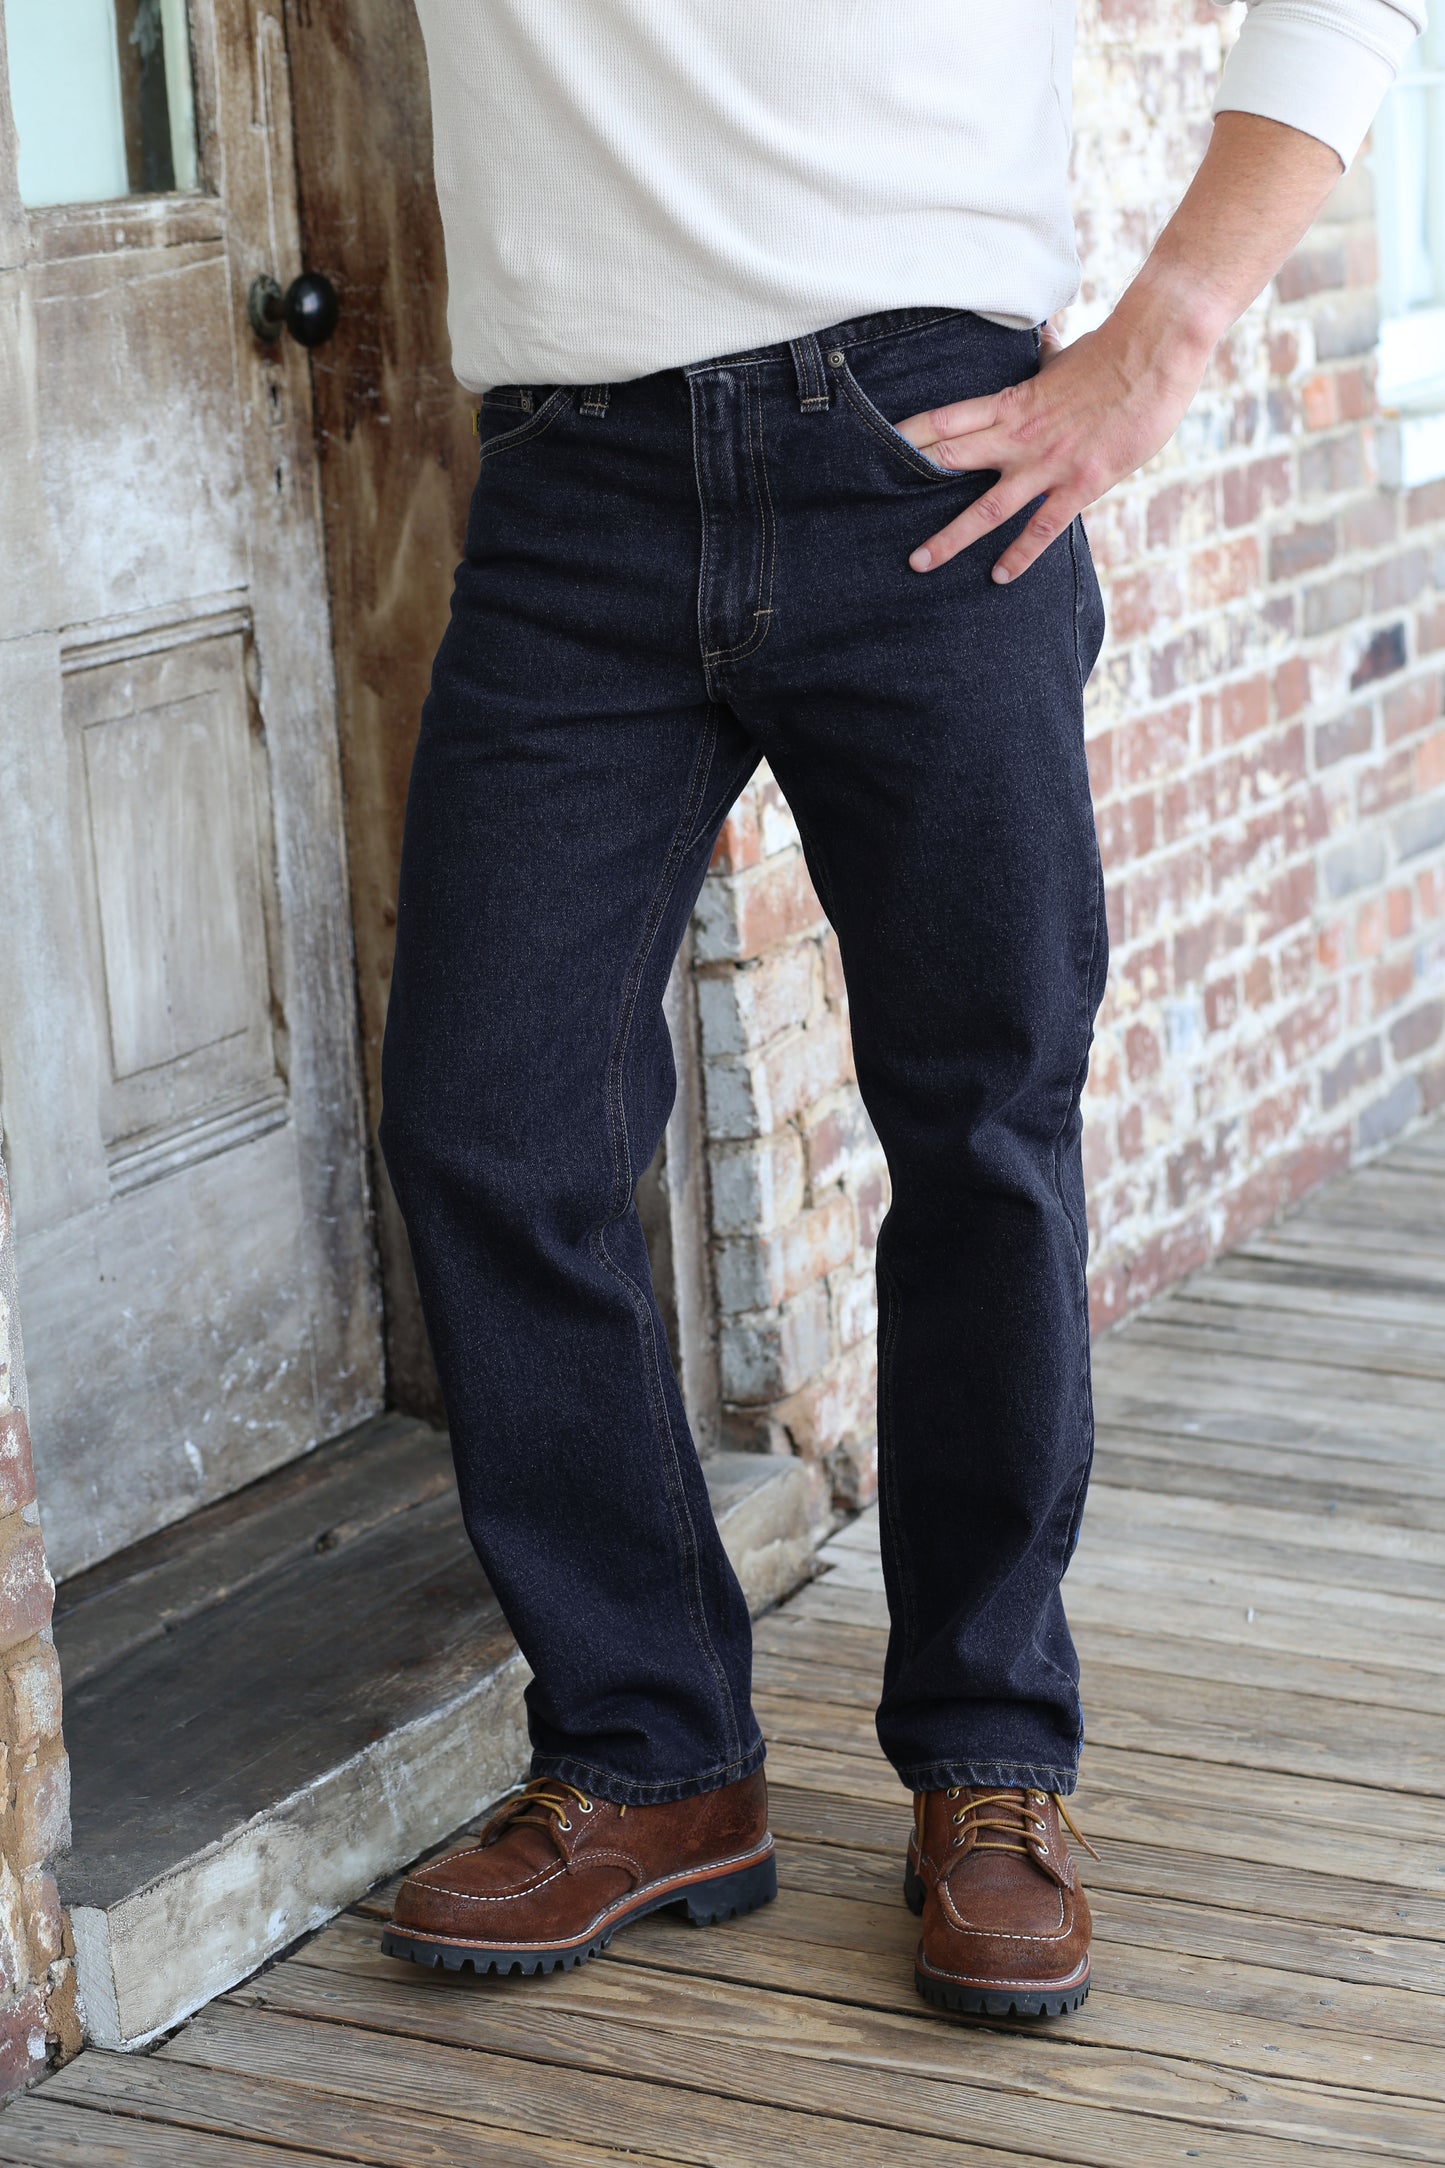 Stride Fit Mid-Wash Jeans